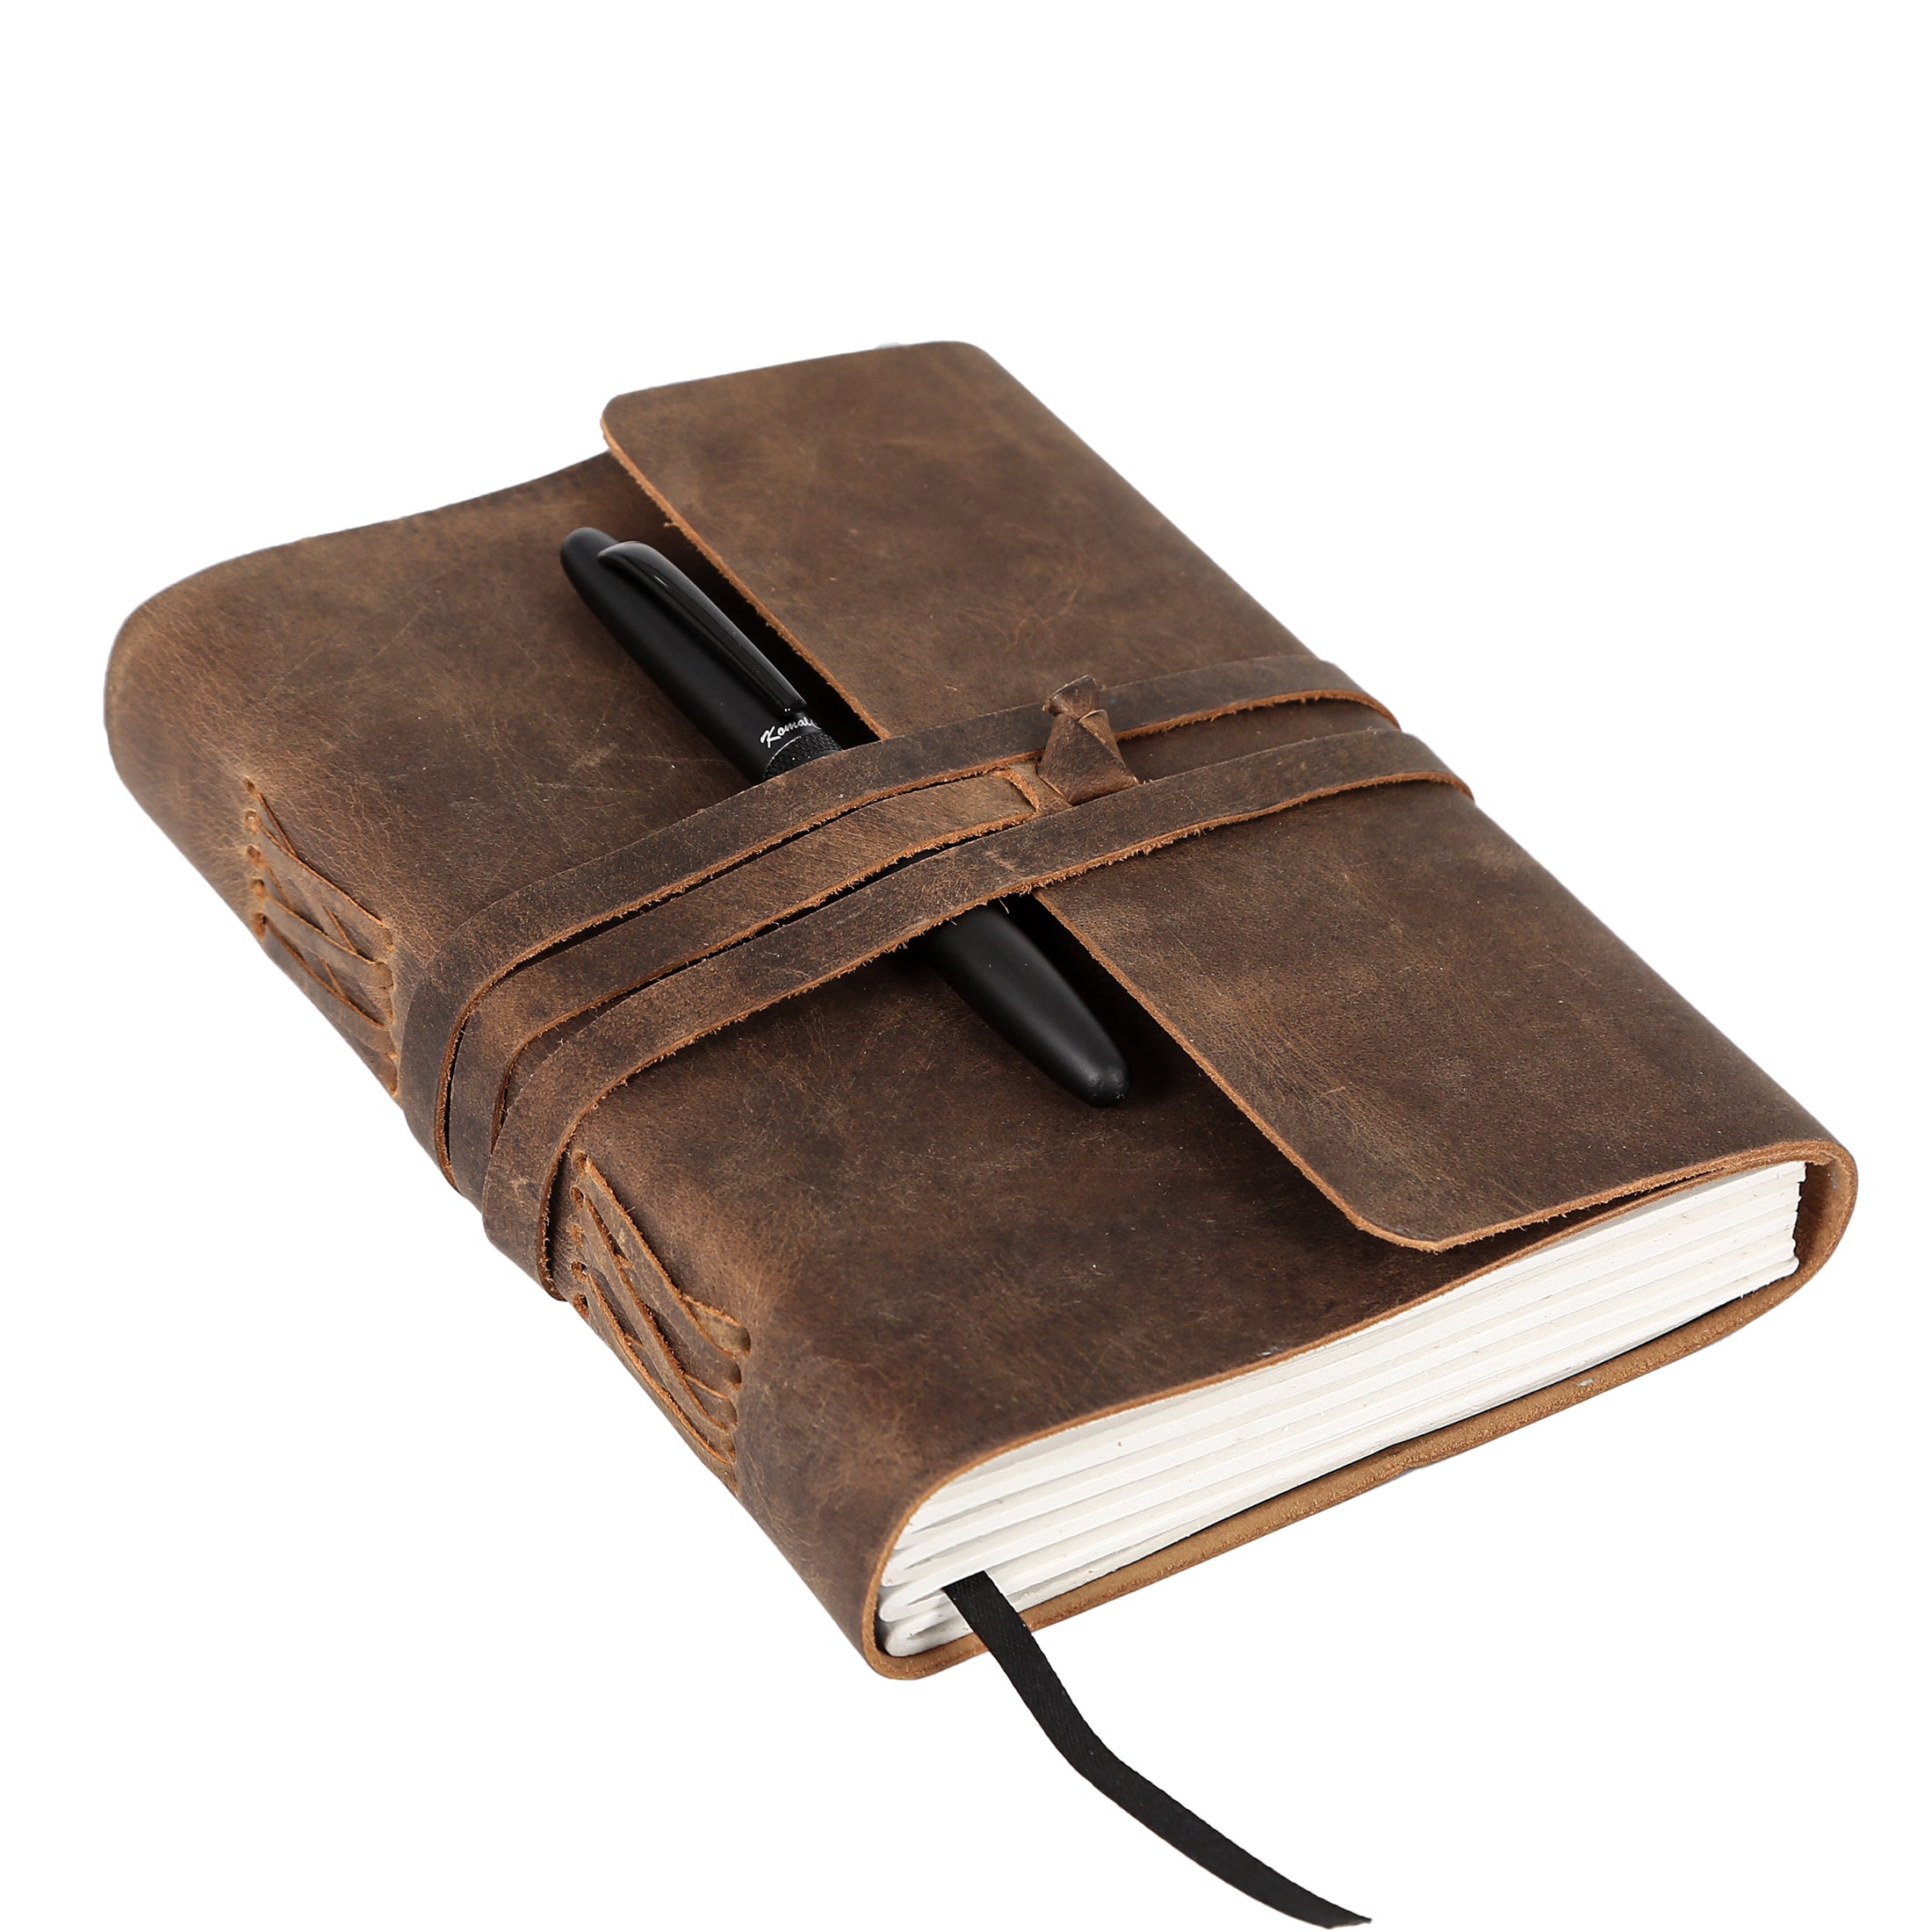 Leather Journal Lined Paper with Luxury Pen Handmade Leather Journal/W